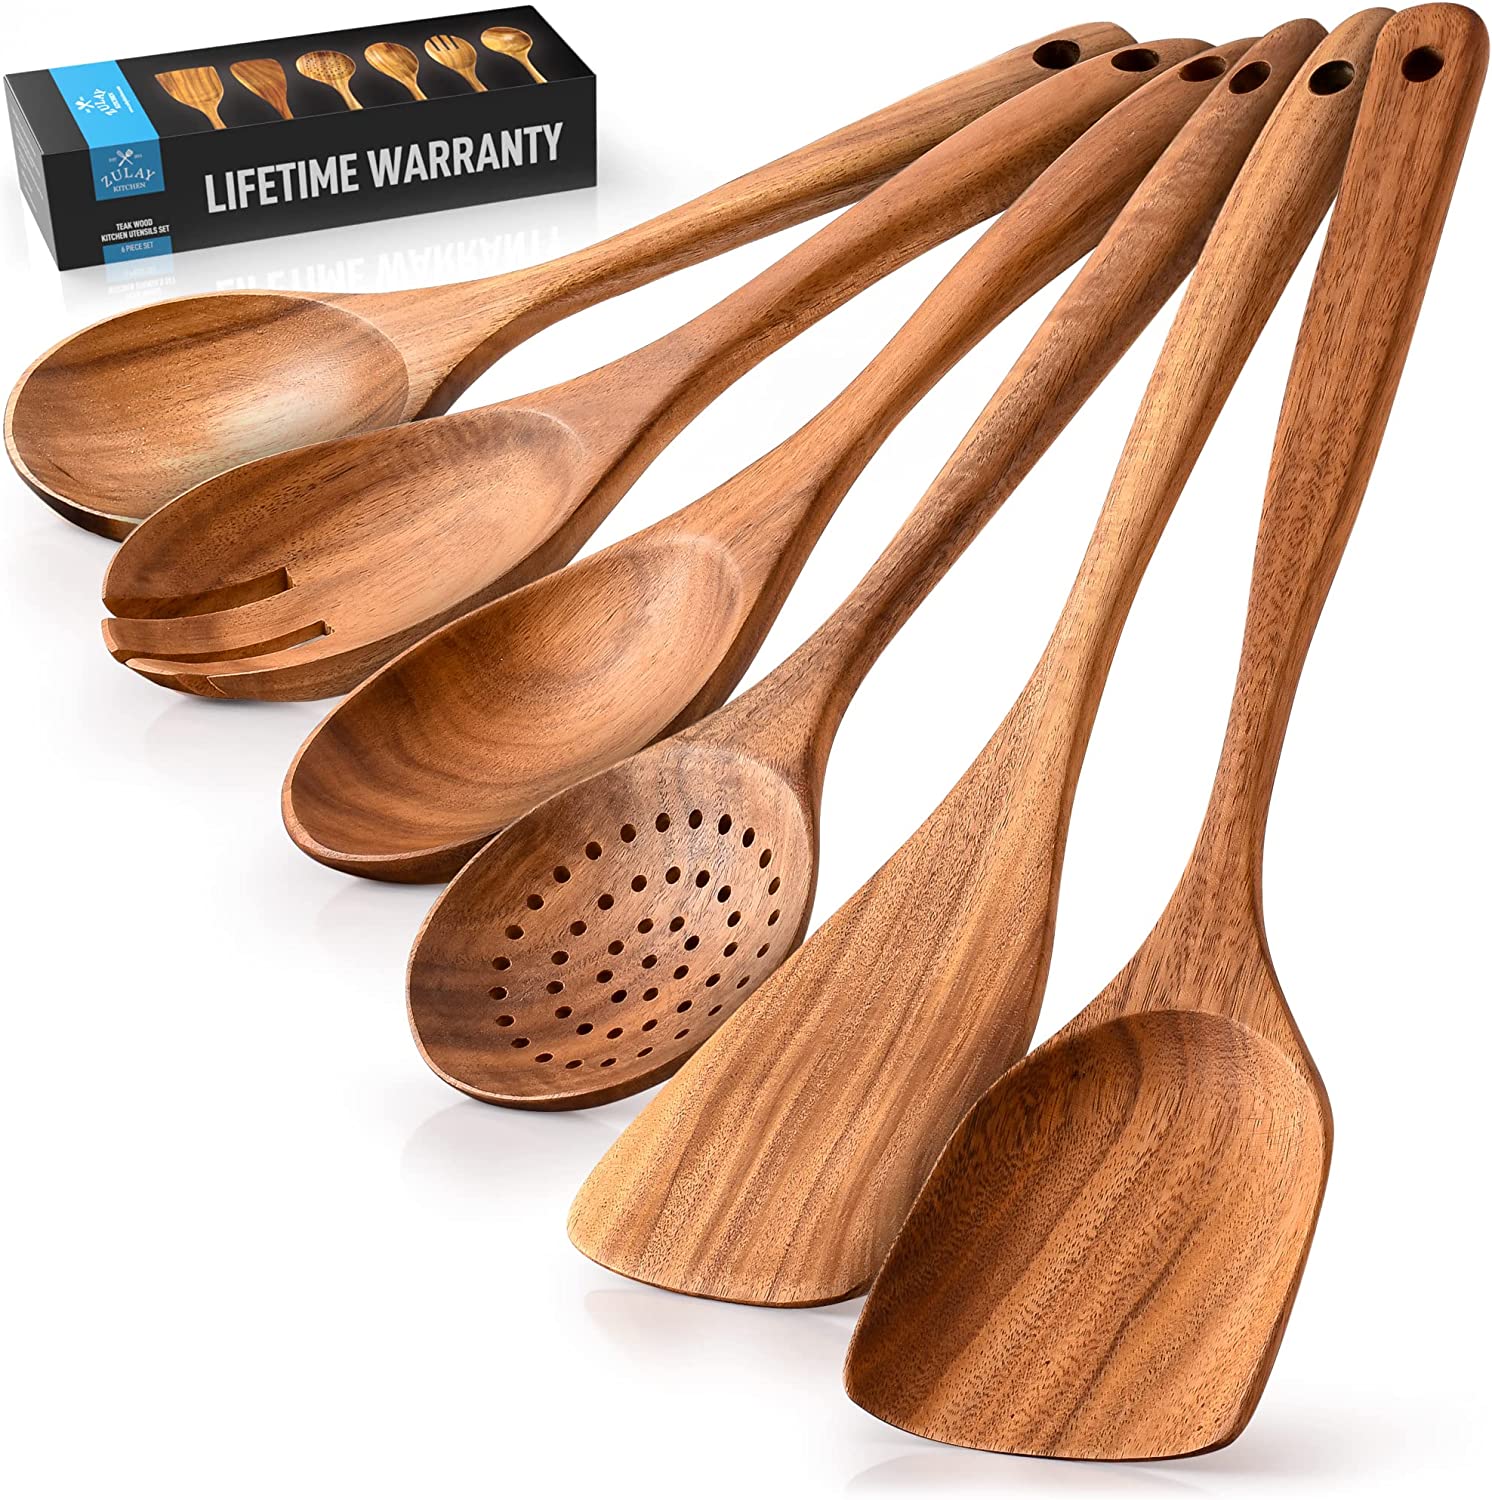 Zulay Kitchen Easy Clean Organic Wooden Spoon & Spoon Set, 6-Piece